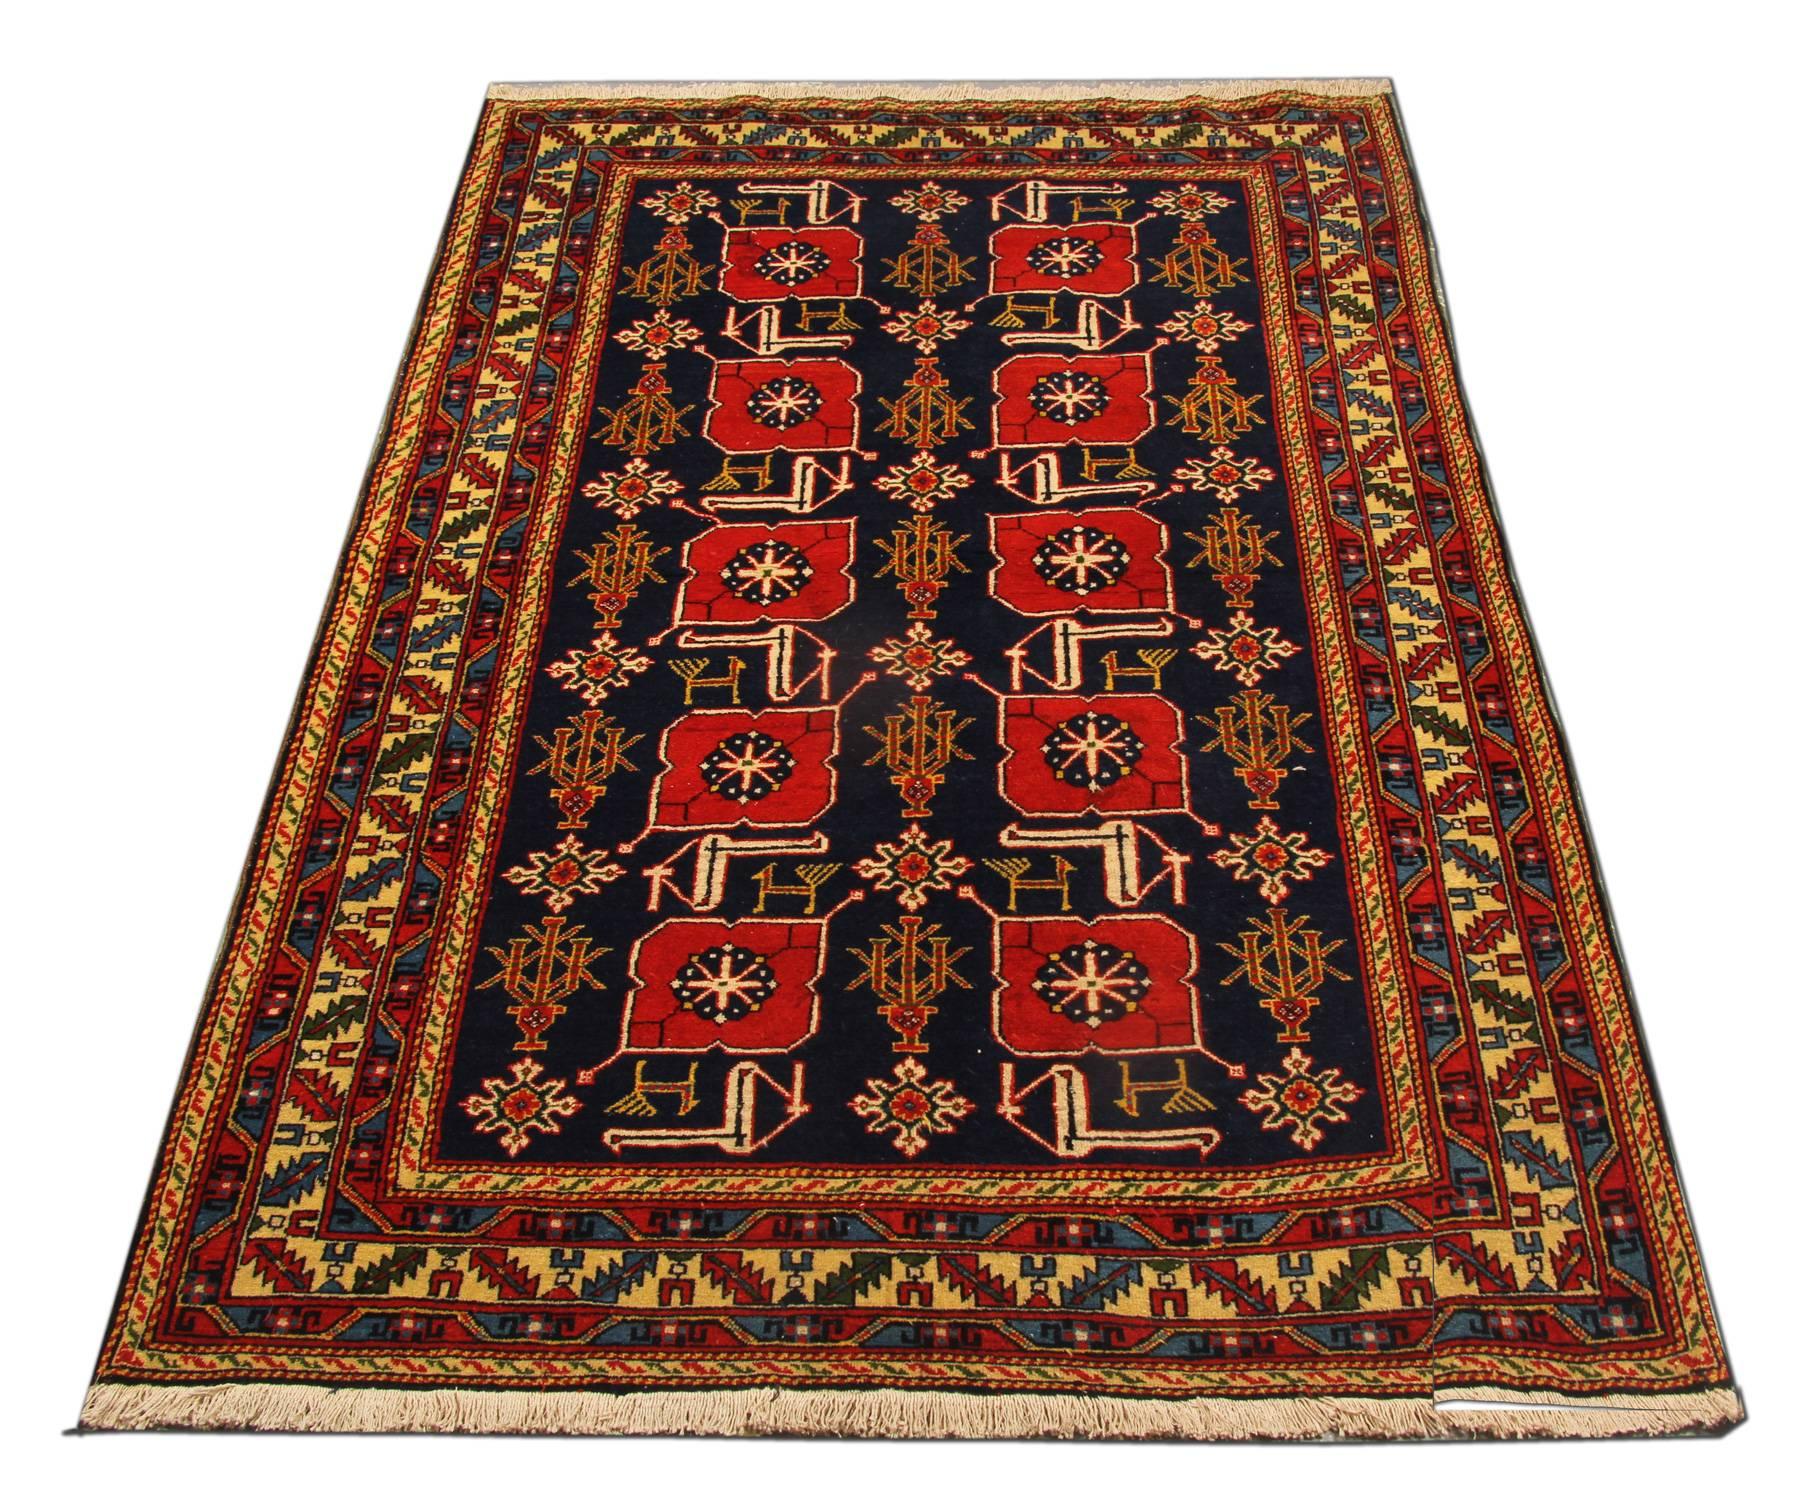 This red rug is a rare antique Caucasian designed Armenian Karabagh. This tribal rug is a one-of-a-kind treasure in the weaving world. The geometric rug design name is Karaghashli. Luxury rugs as this antique piece of art would complement give